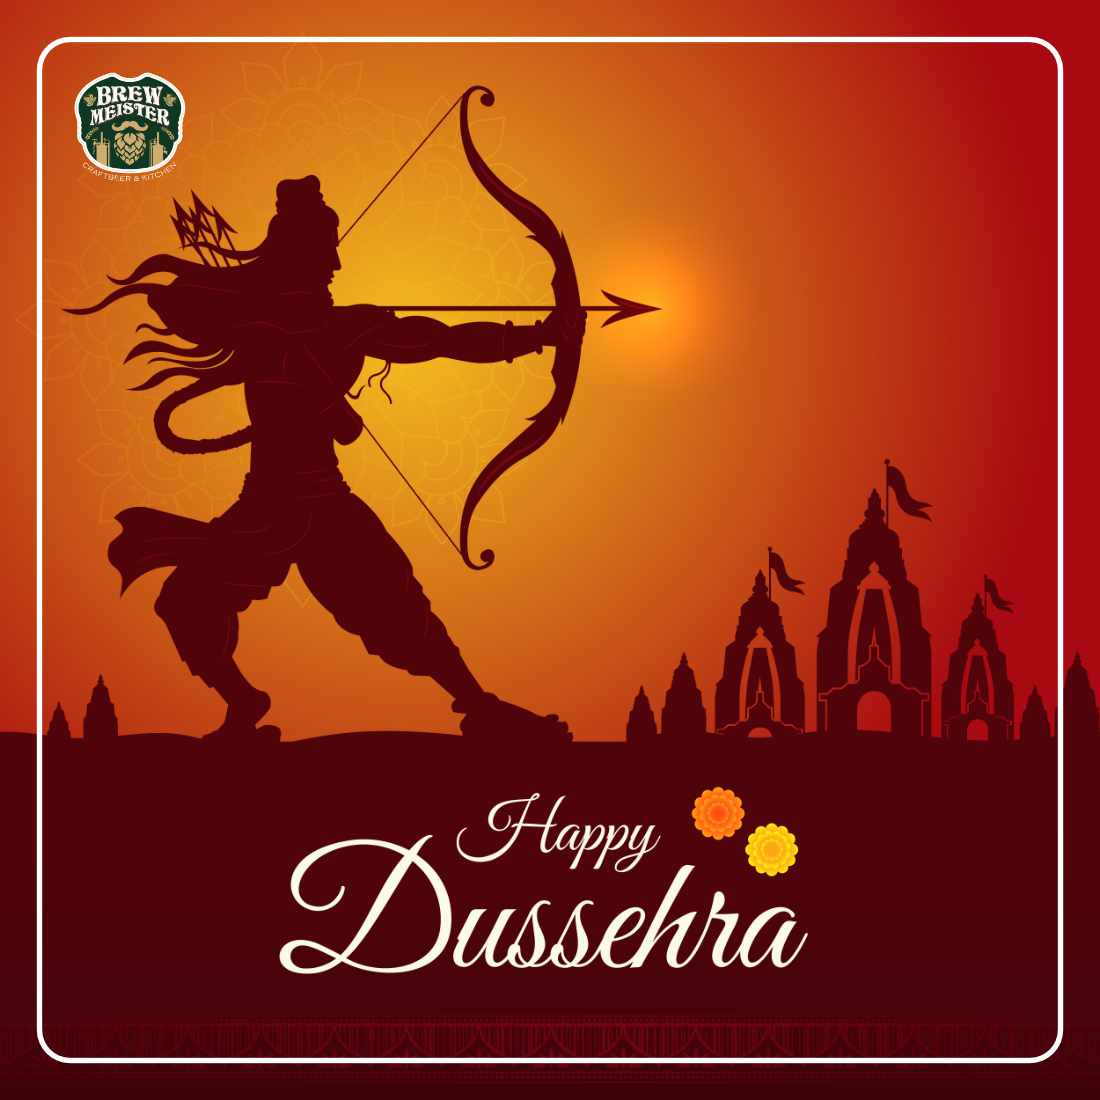 Dussehra Greetings for Brew Meister